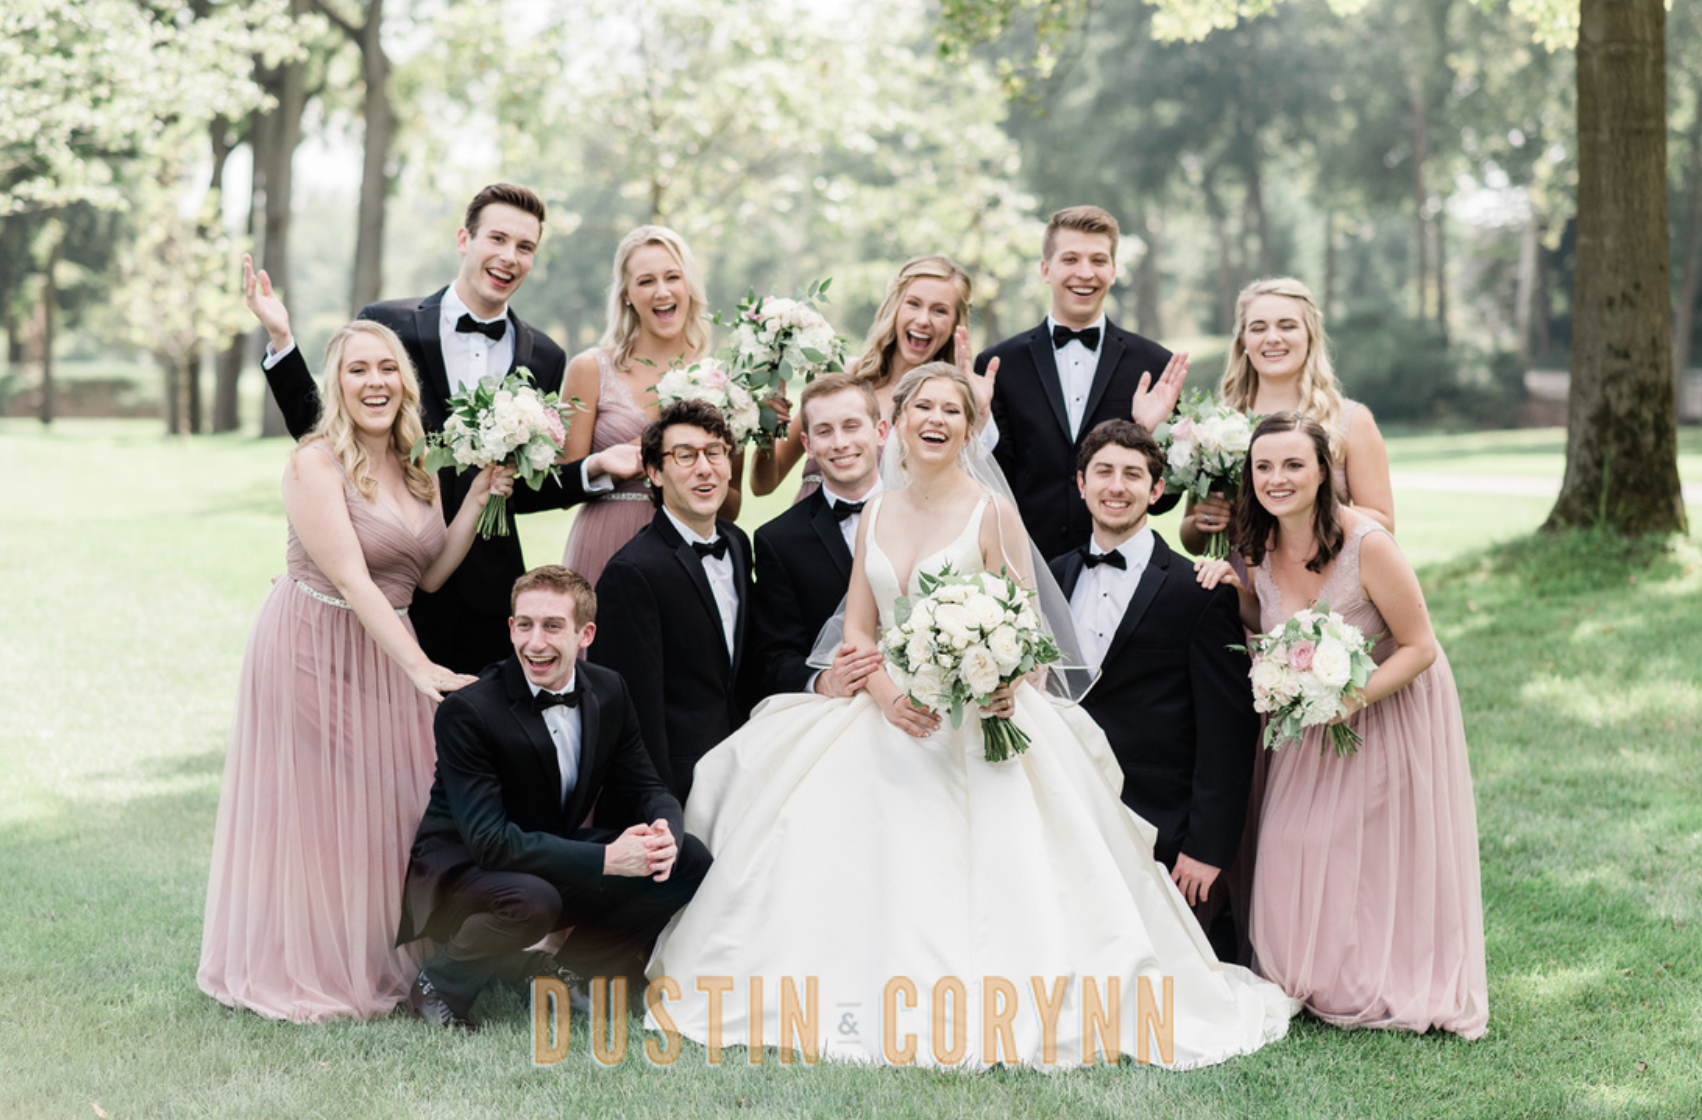 Fort Wayne wedding photographer captures bridal party laughing and having fun